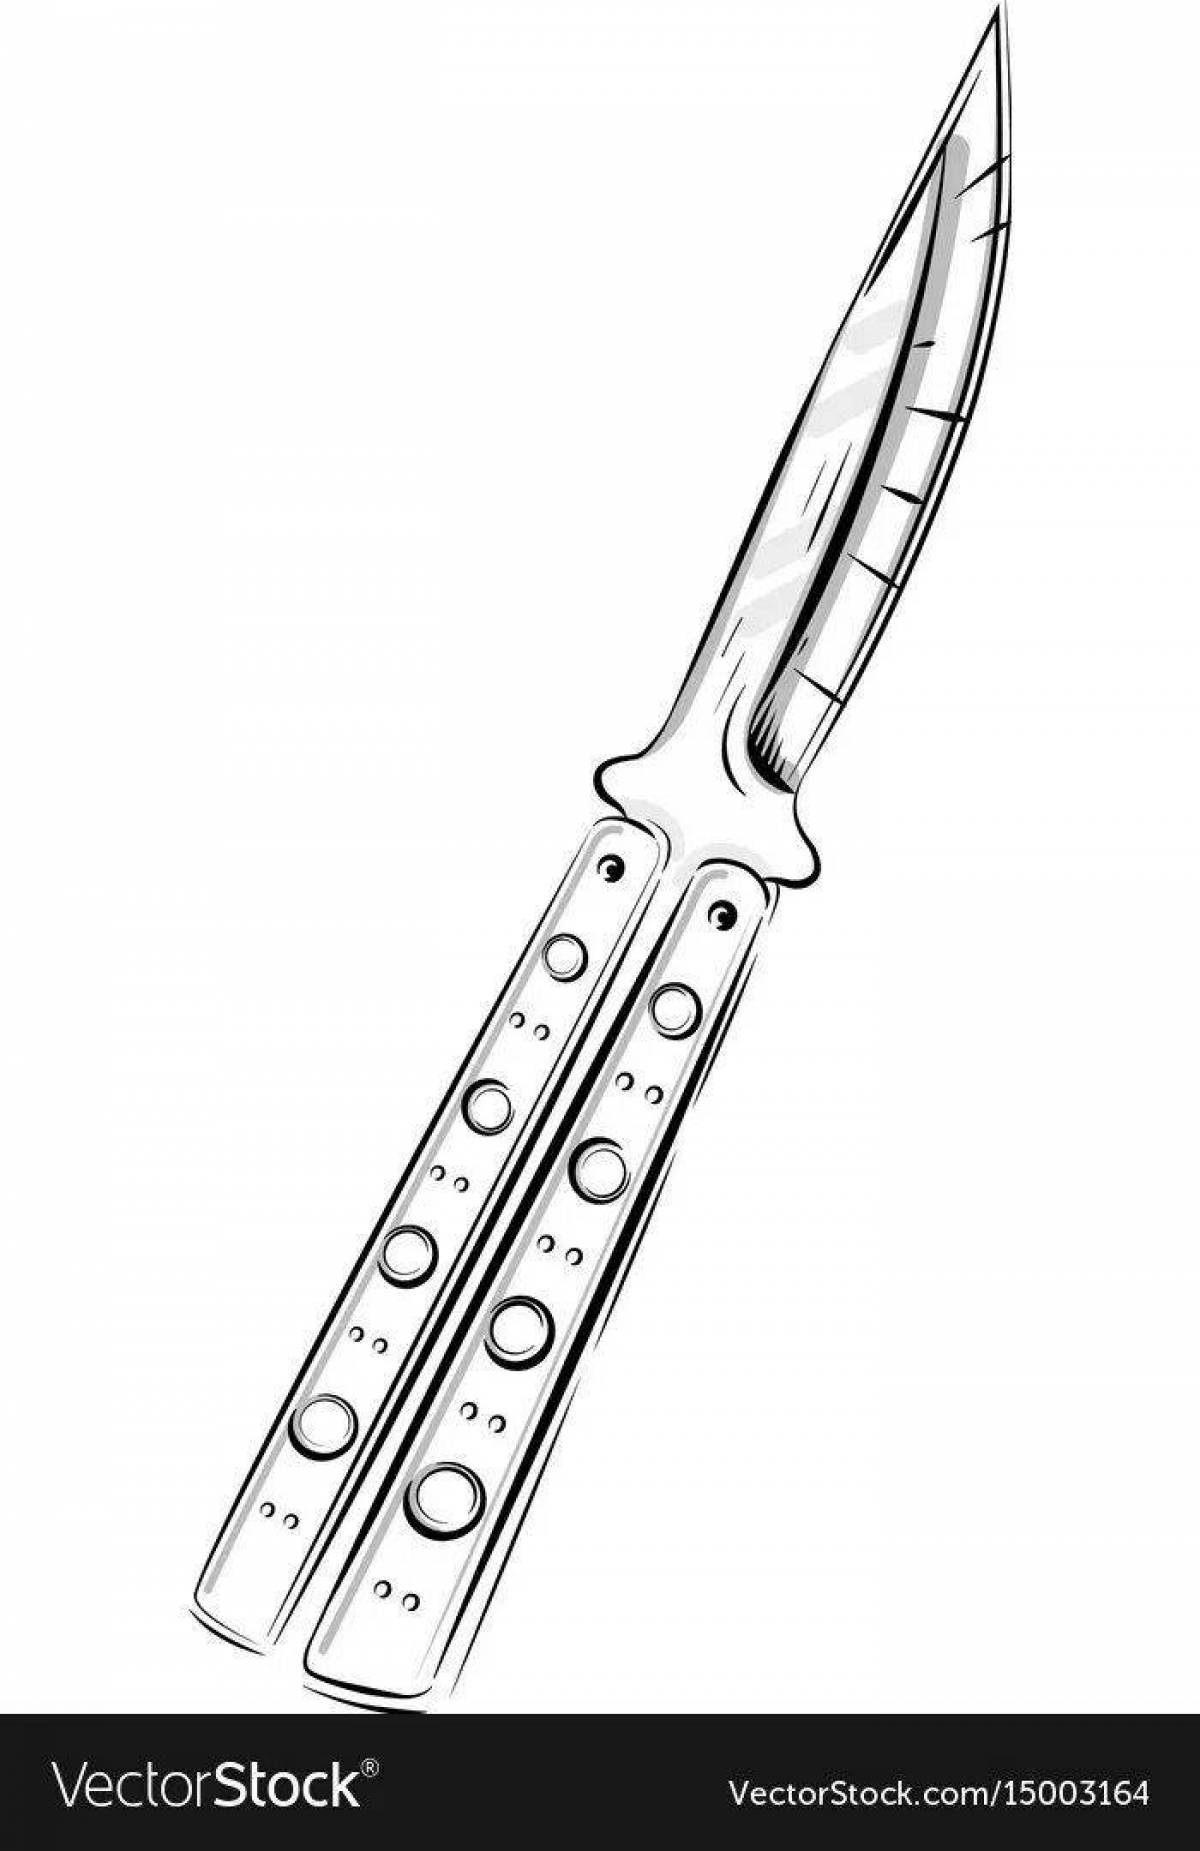 Delicate coloring of the butterfly knife from standoff 2